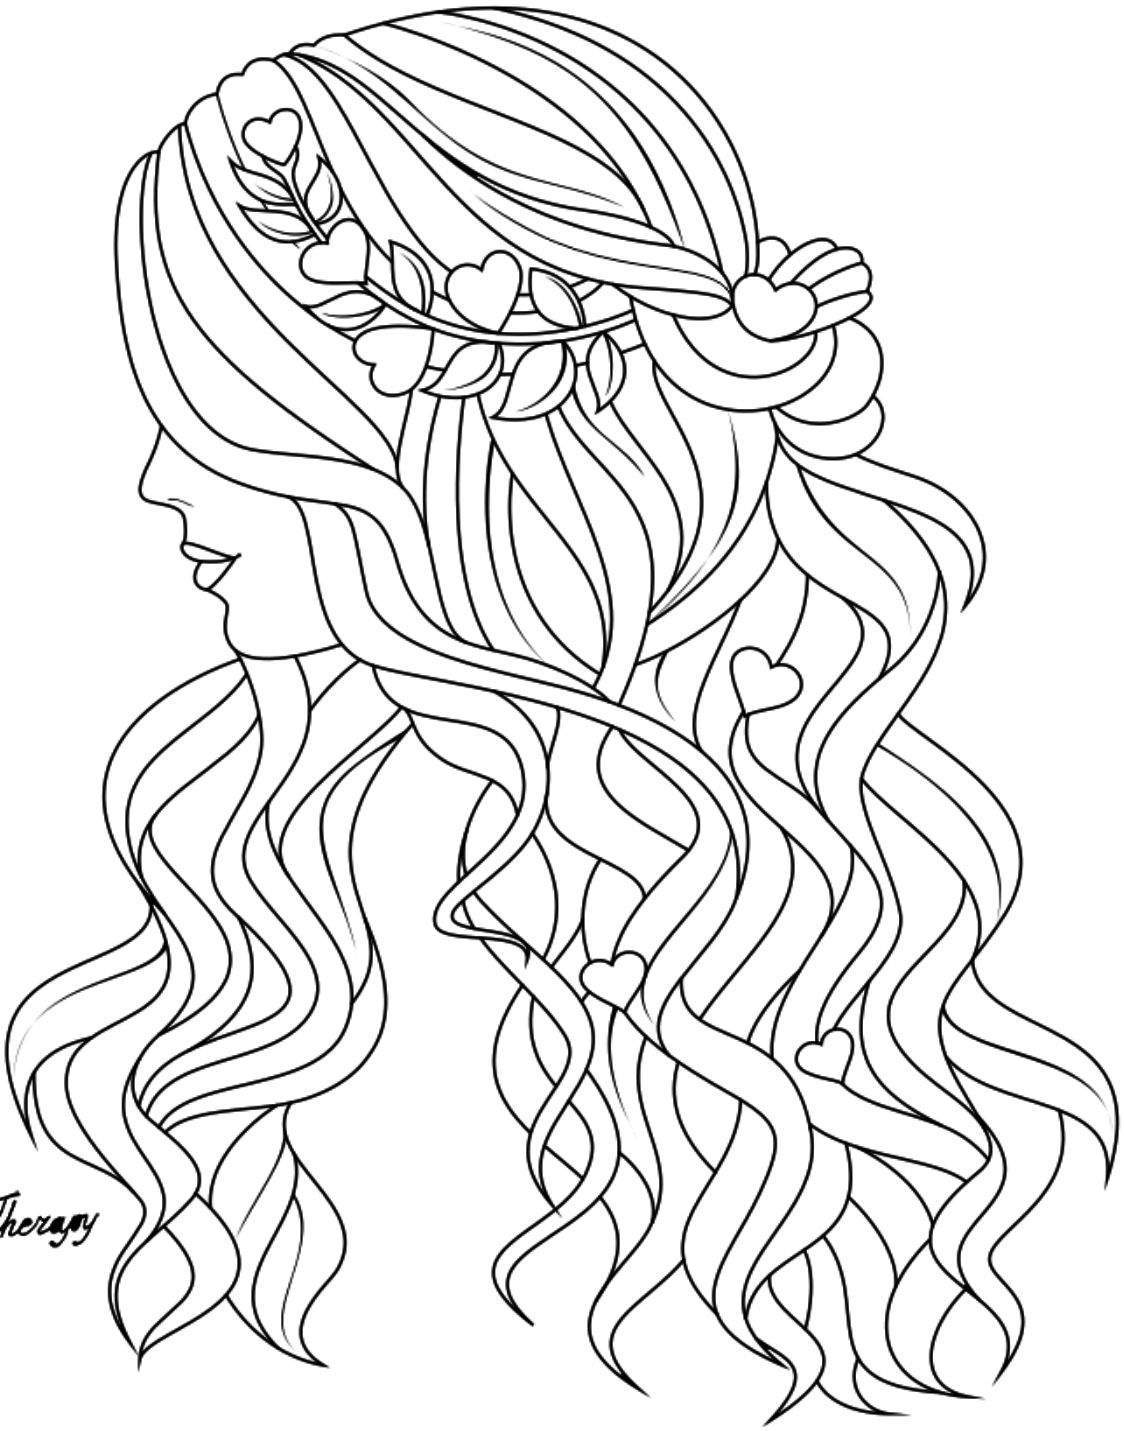 Abstract art coloring pages